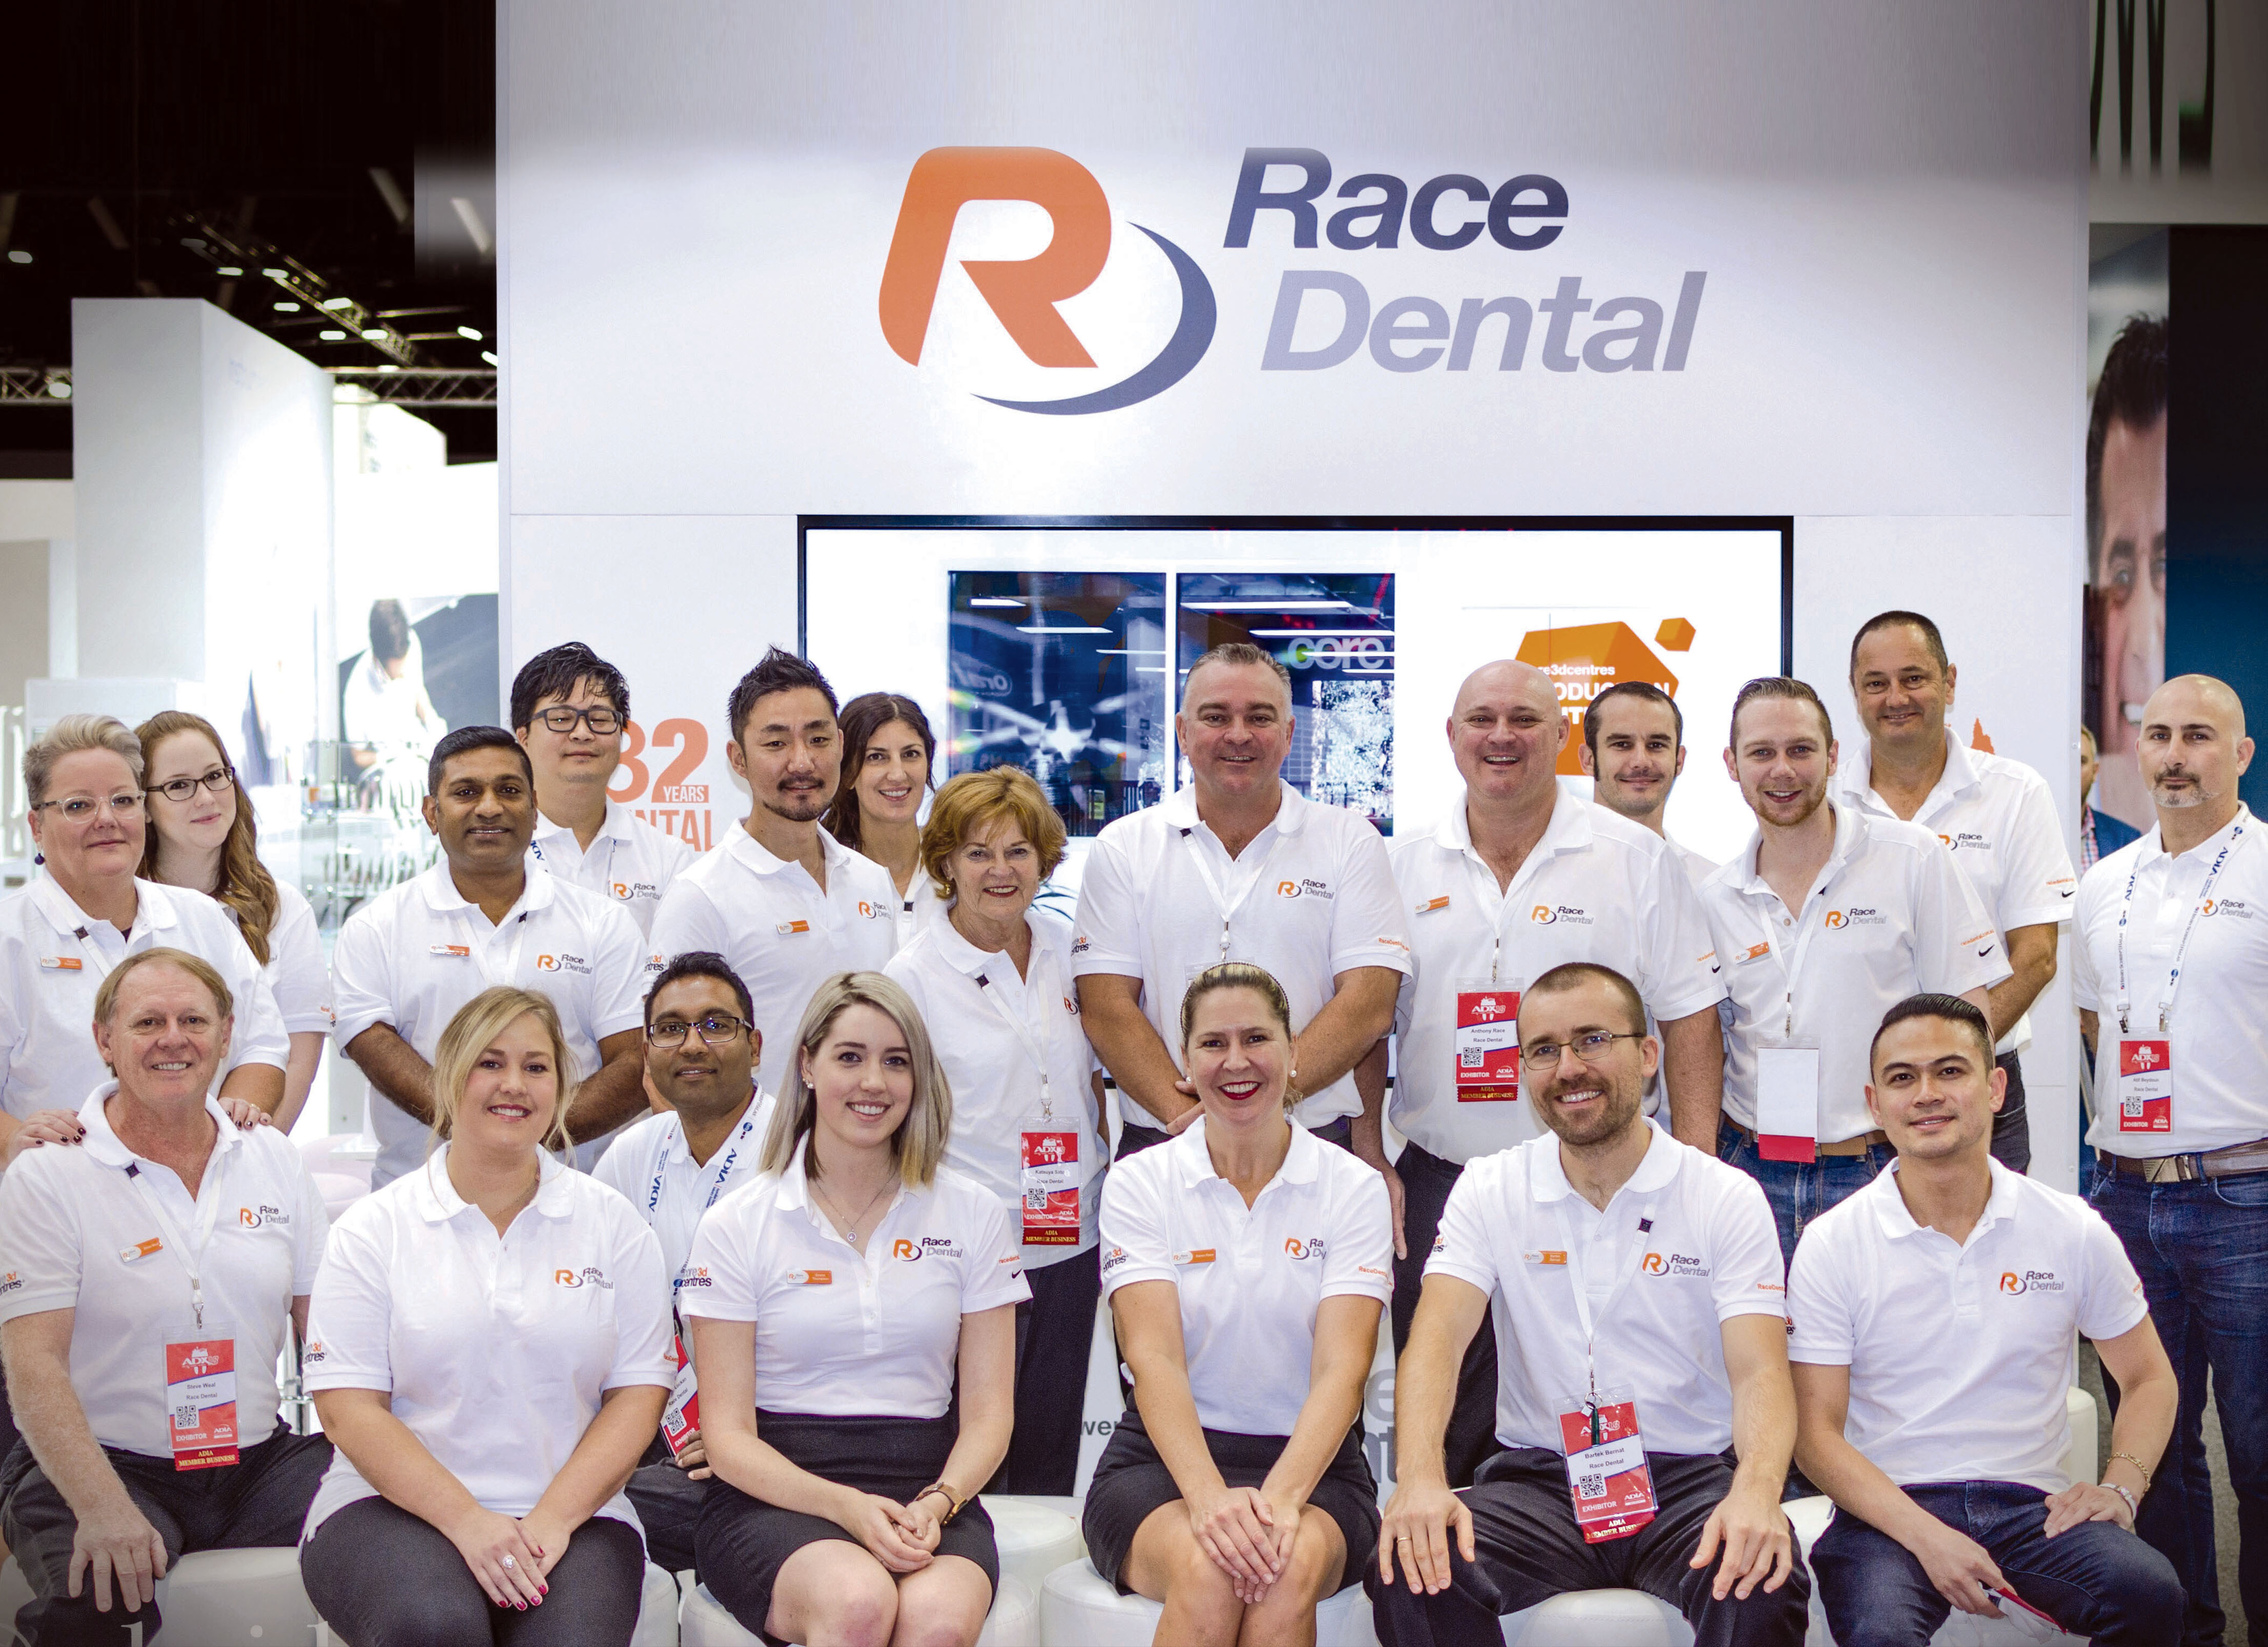 Race Dental at the ADX18